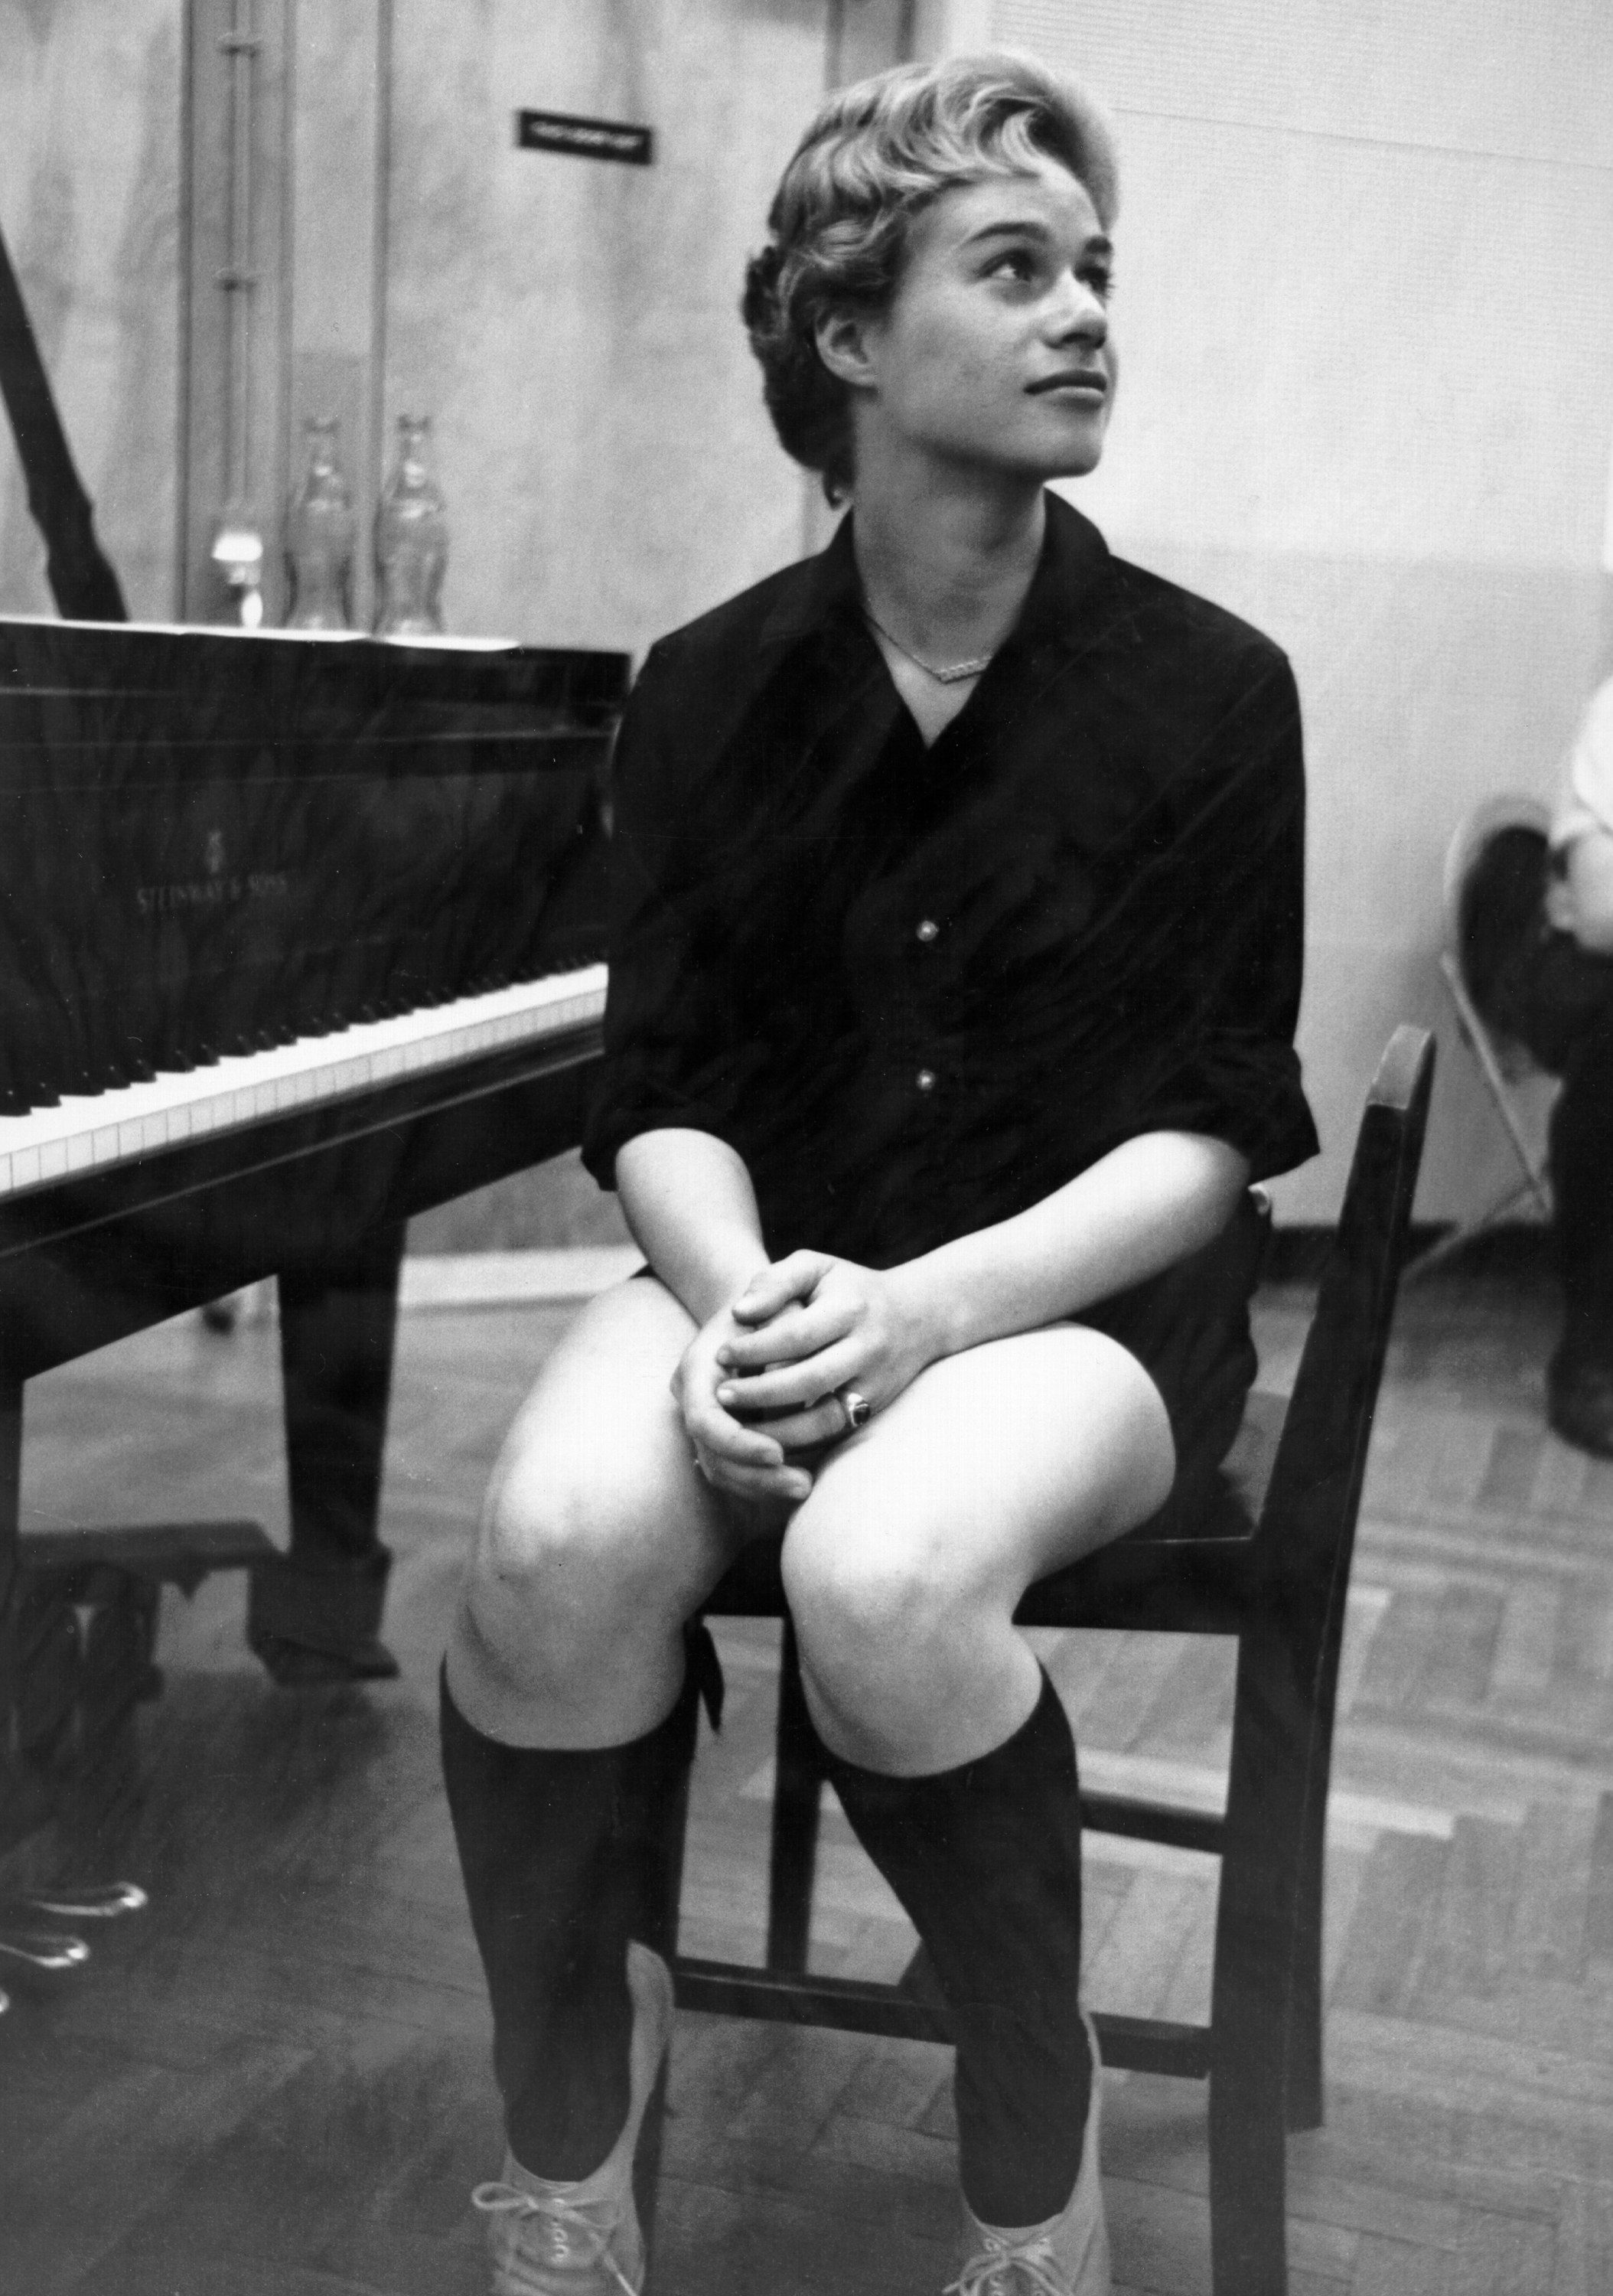 King sitting at a piano in the studio in 1959